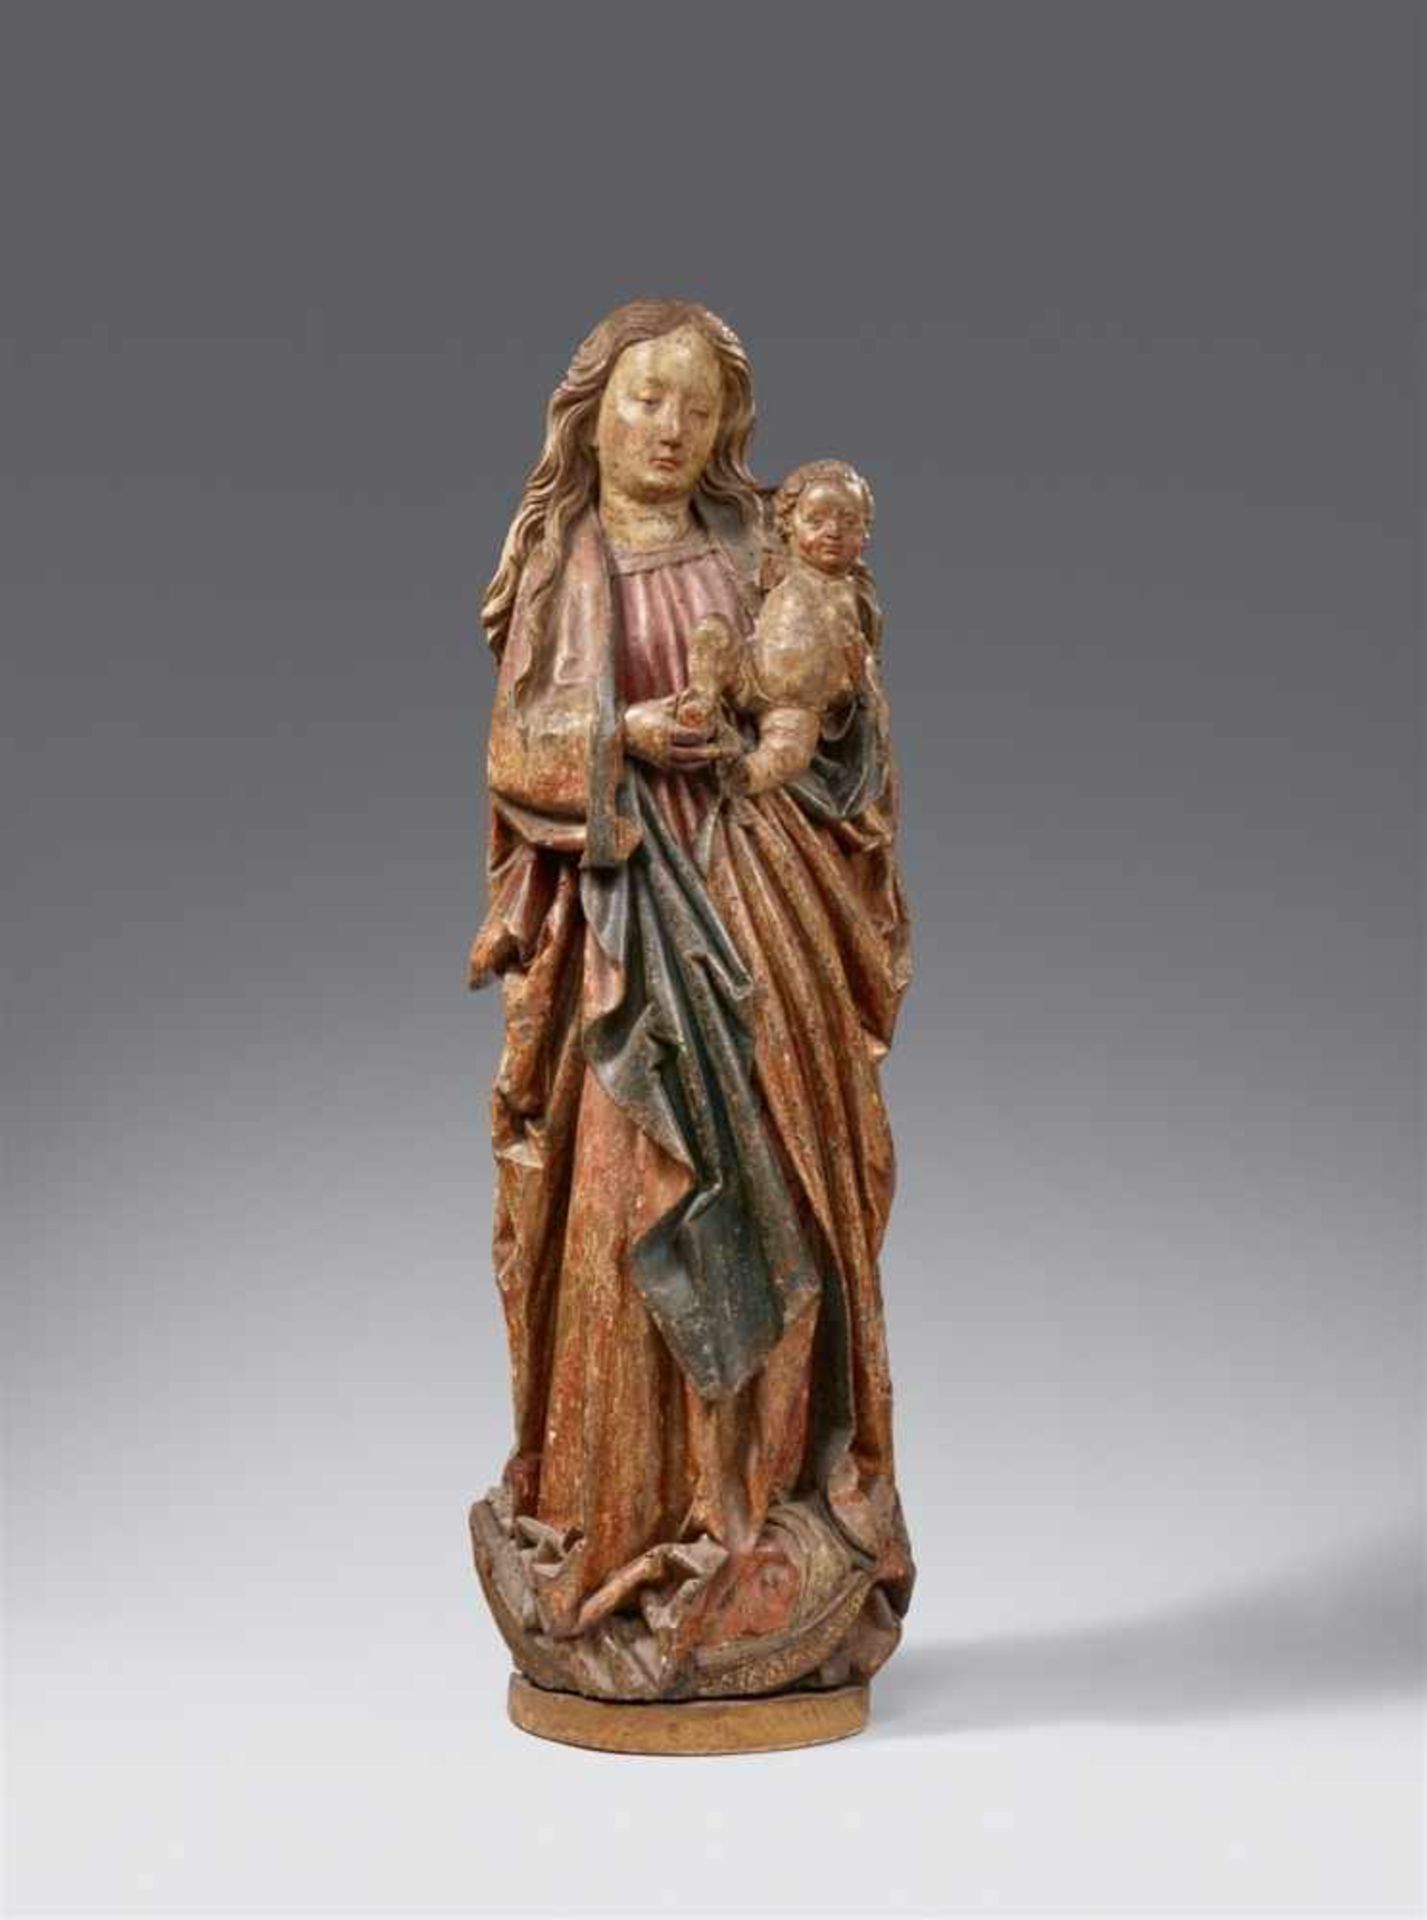 A late 15th century Franconian carved wood figure of the Virgin and ChildCarved three-quarters in